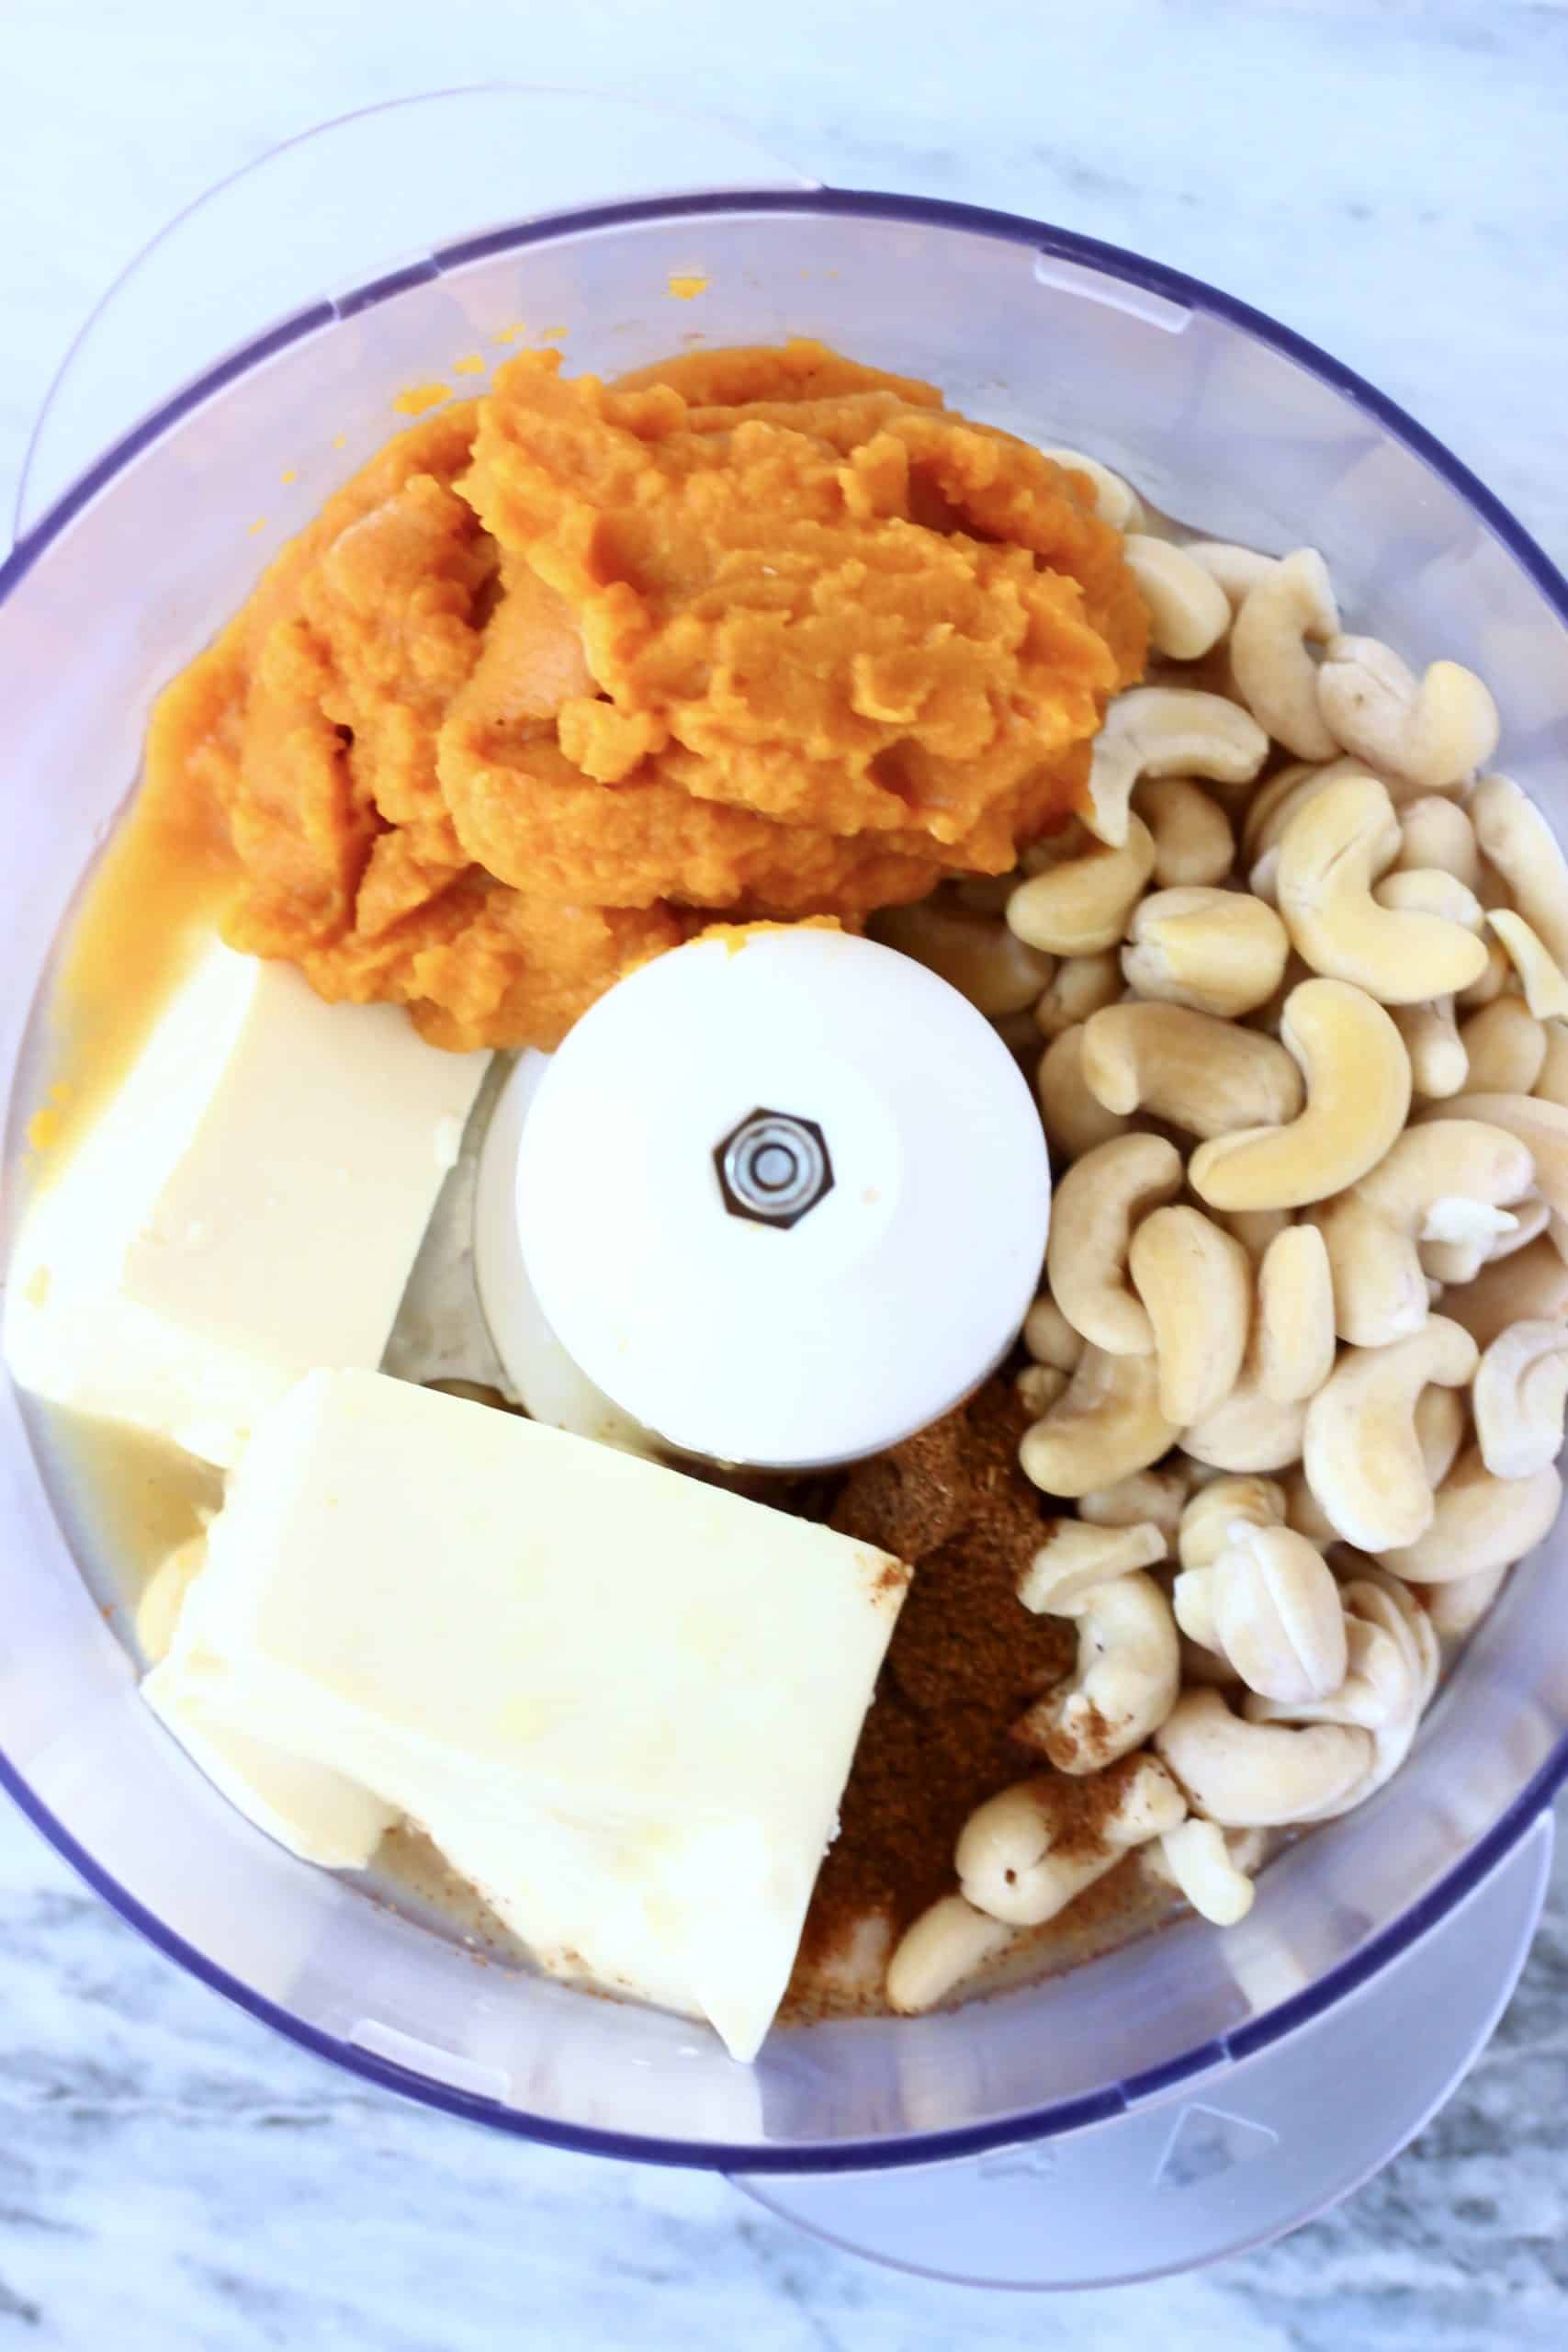 Tofu, pumpkin purée, cashew nuts, spices and maple syrup in a food processor